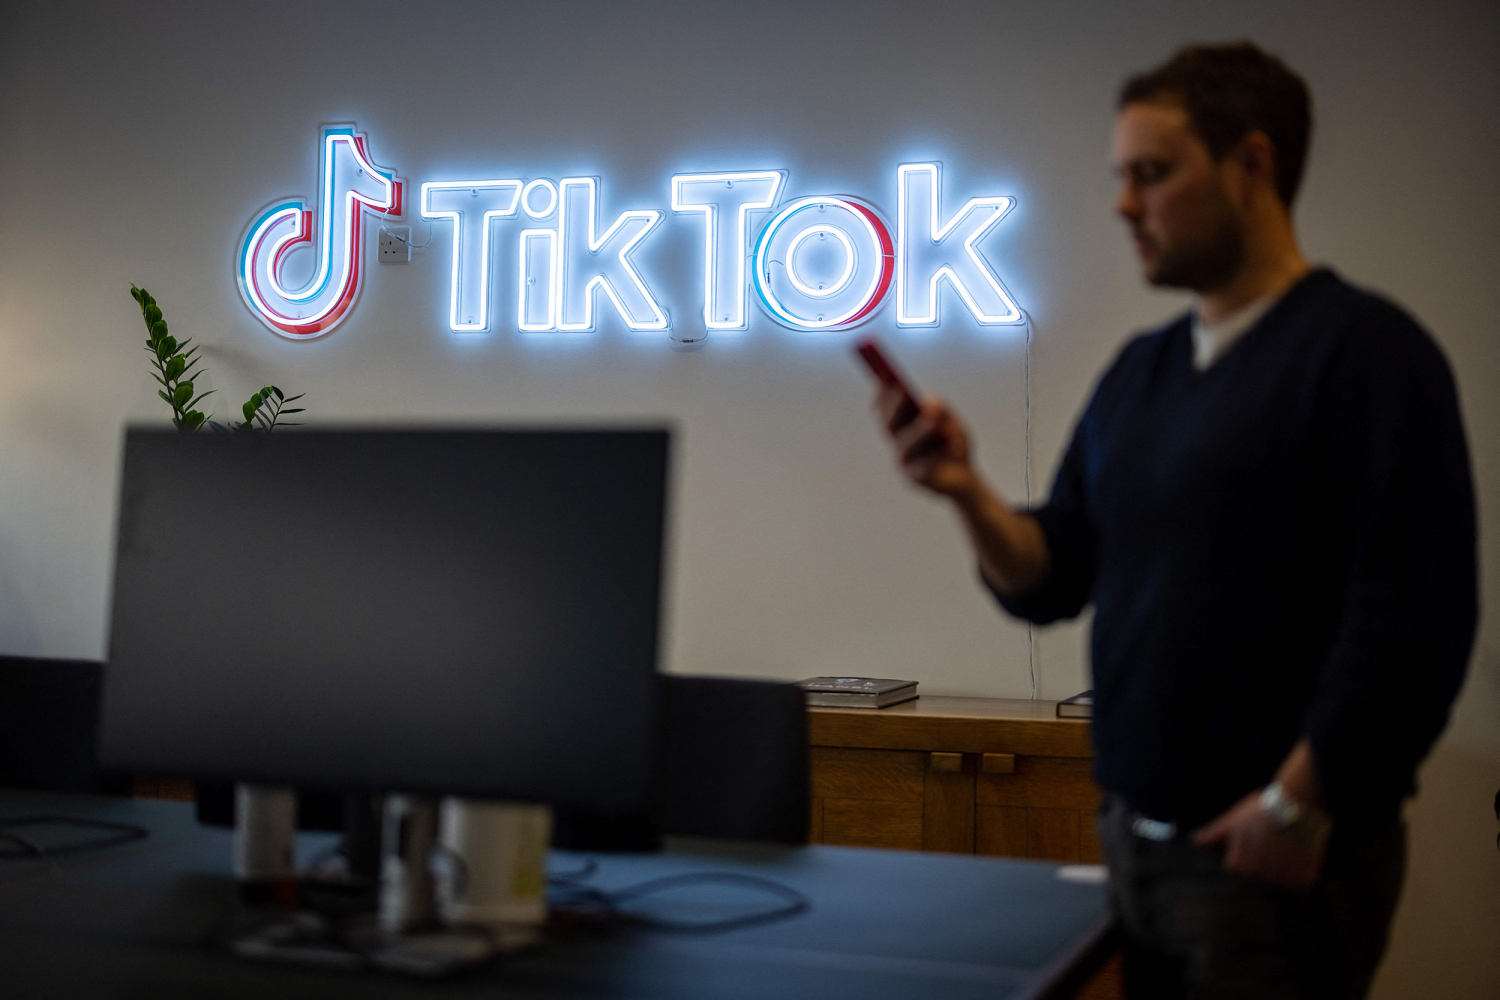 biden campaign joins tiktok after saying it wouldn't